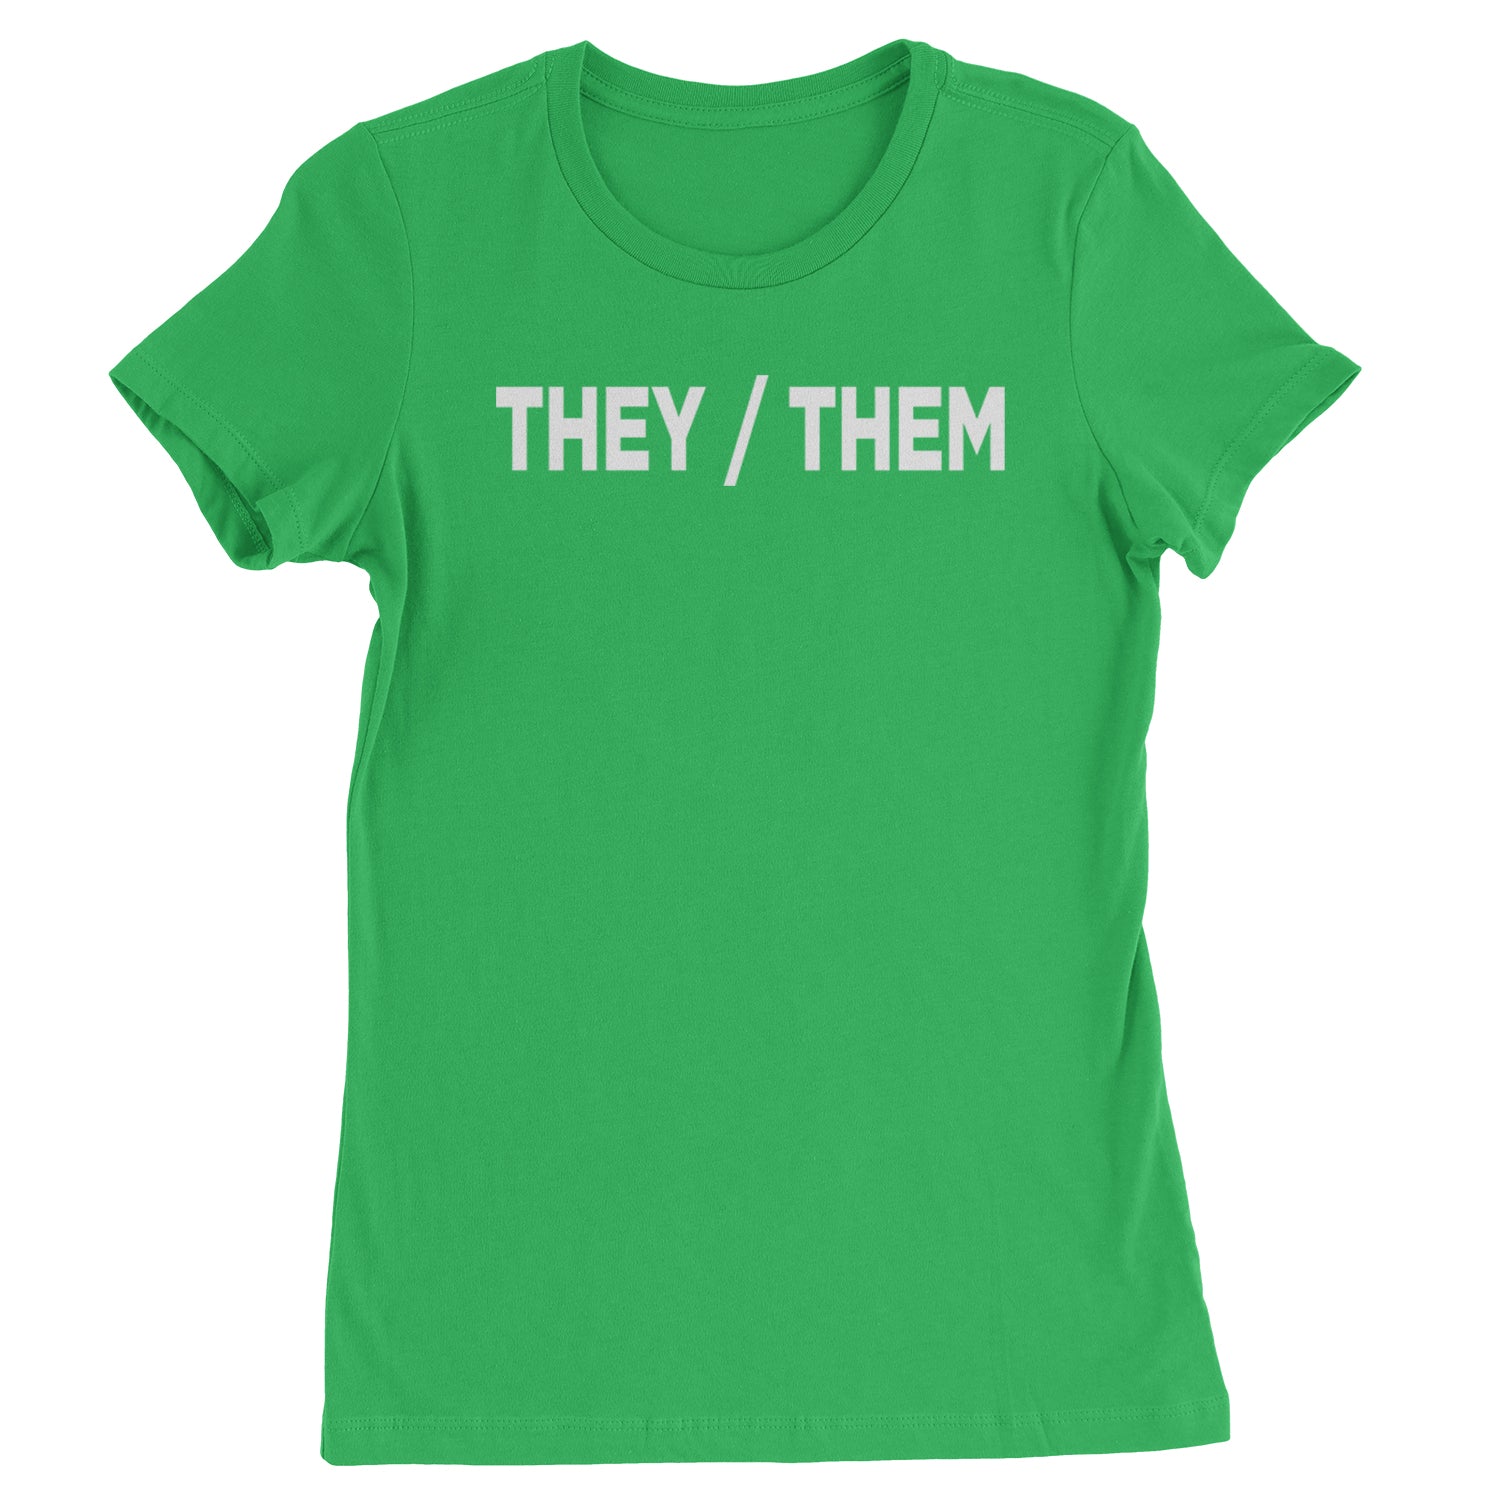 They Them Gender Pronouns Diversity and Inclusion Womens T-shirt binary, civil, gay, he, her, him, nonbinary, pride, rights, she, them, they by Expression Tees